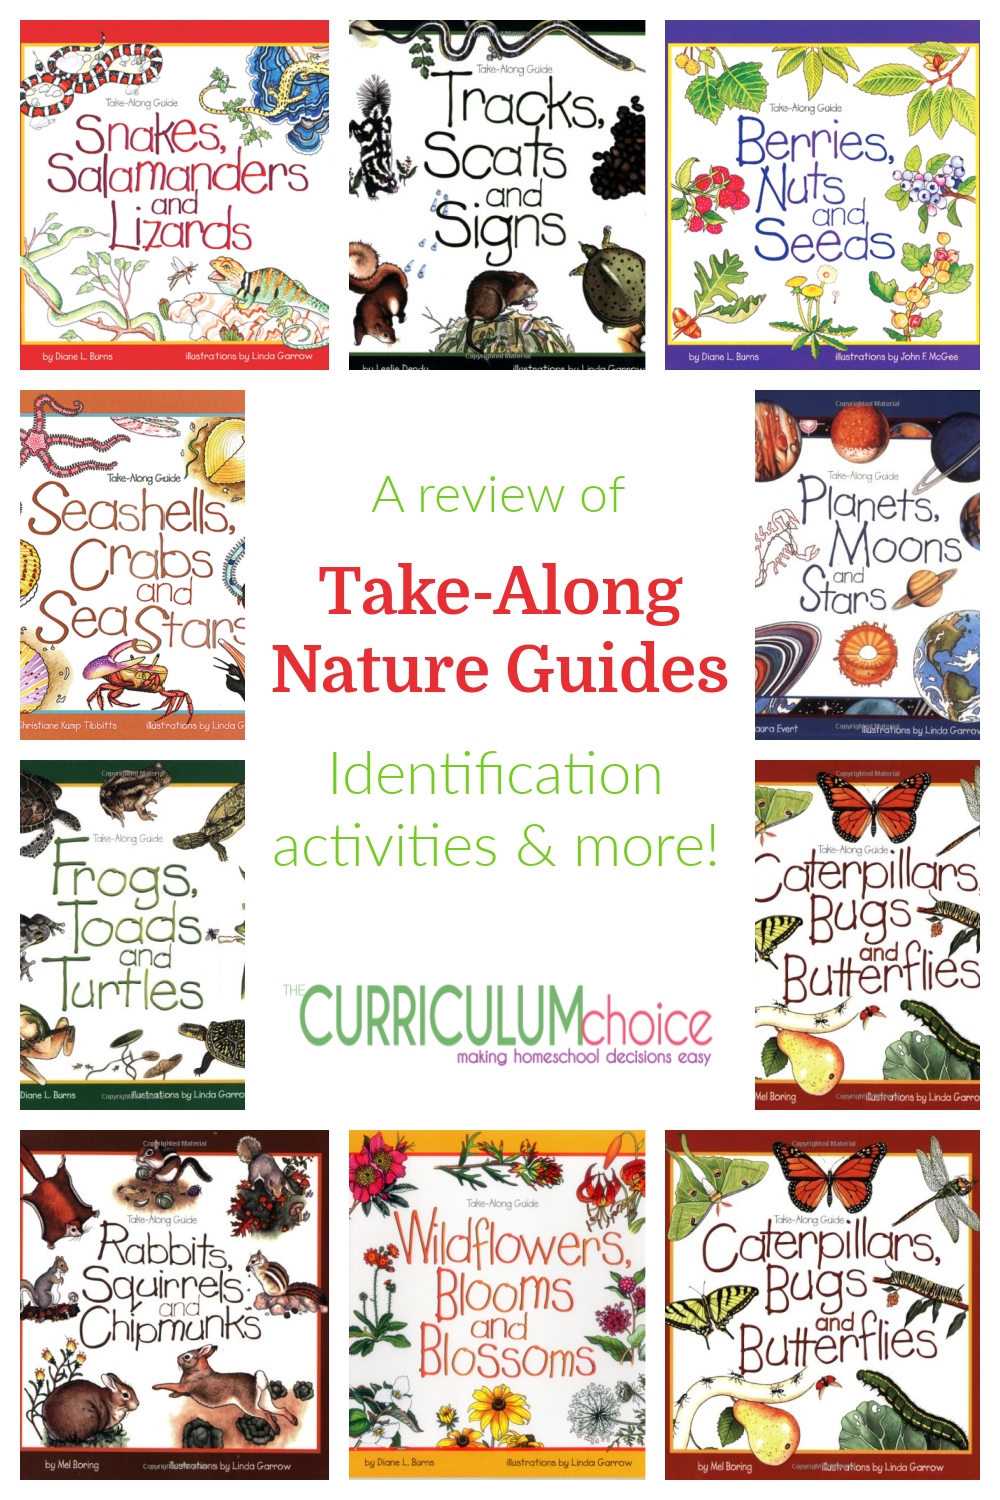 Take-Along Nature Guides - easy on-the-go guides for exploring, and identifying all kinds of creatures and plants with fun activities too! A review from The Curriculum Choice